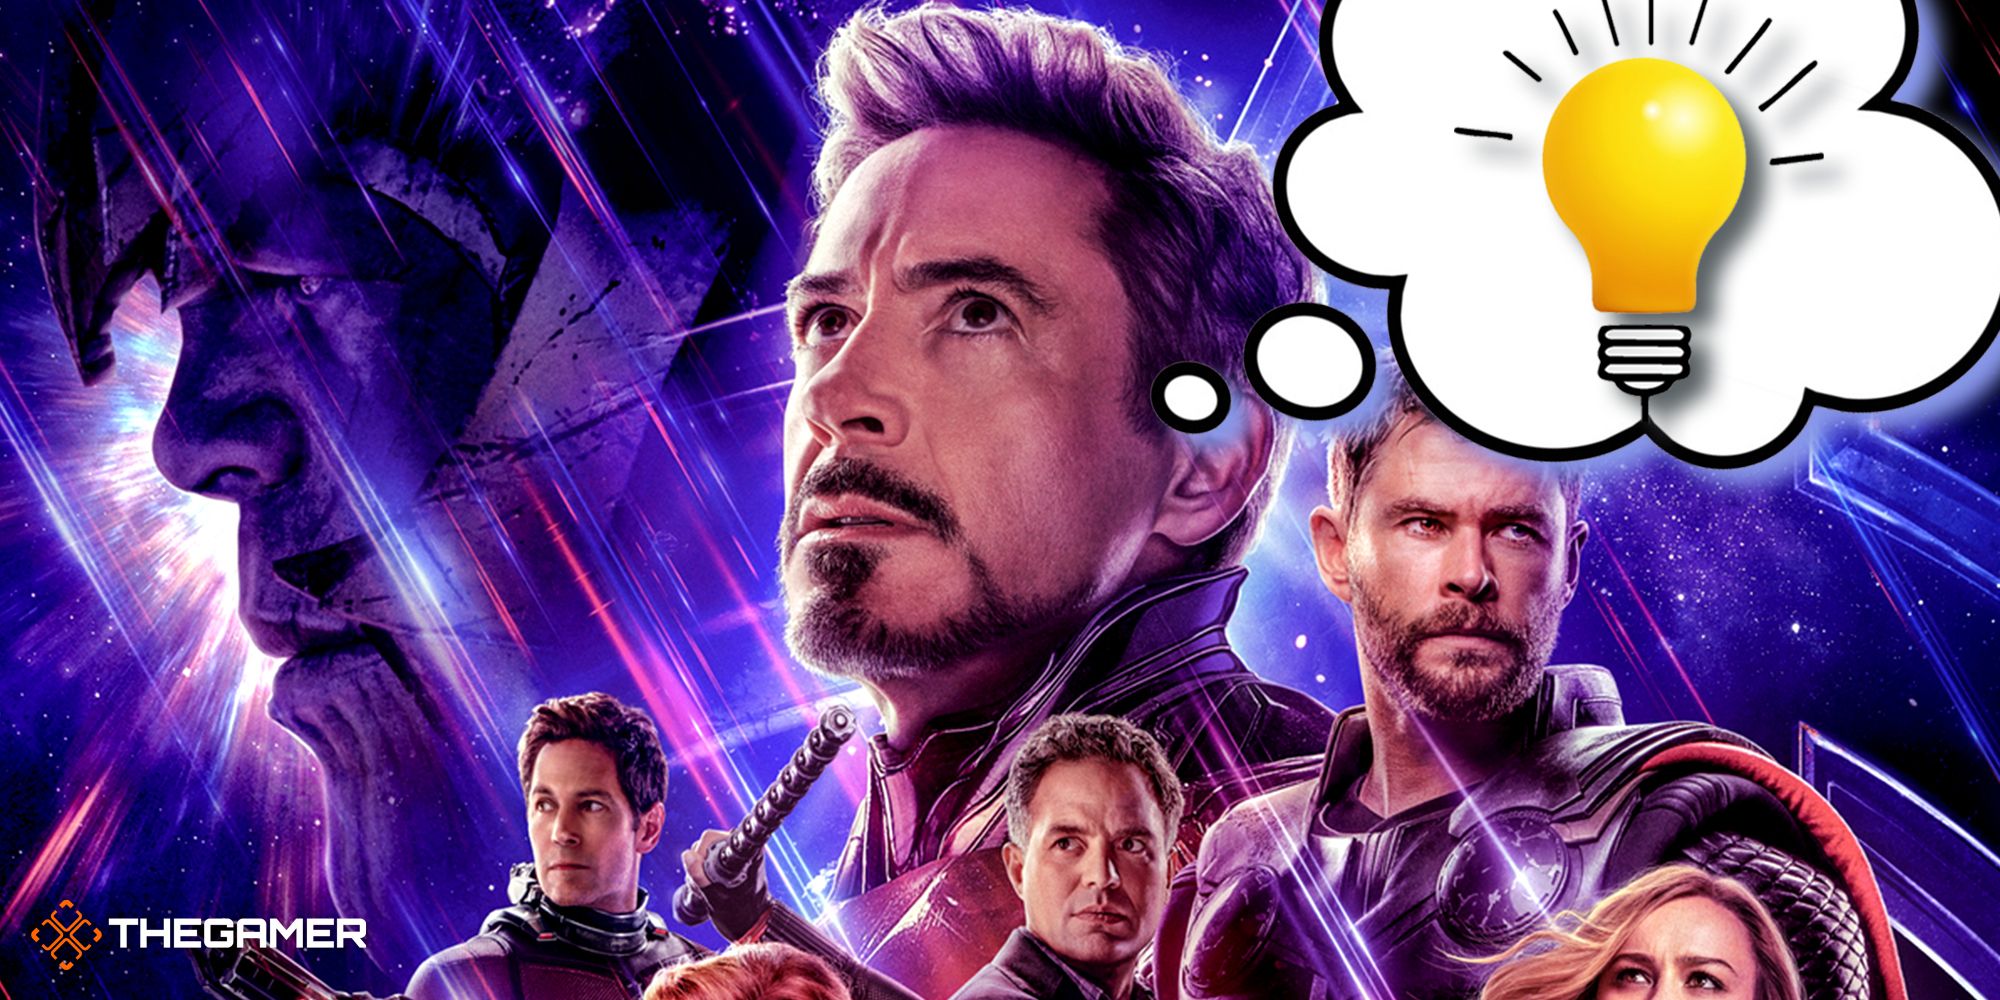 Robert Downey Jr. as Iron Man with a light bulb thought bubble on the Avengers: Endgame poster.